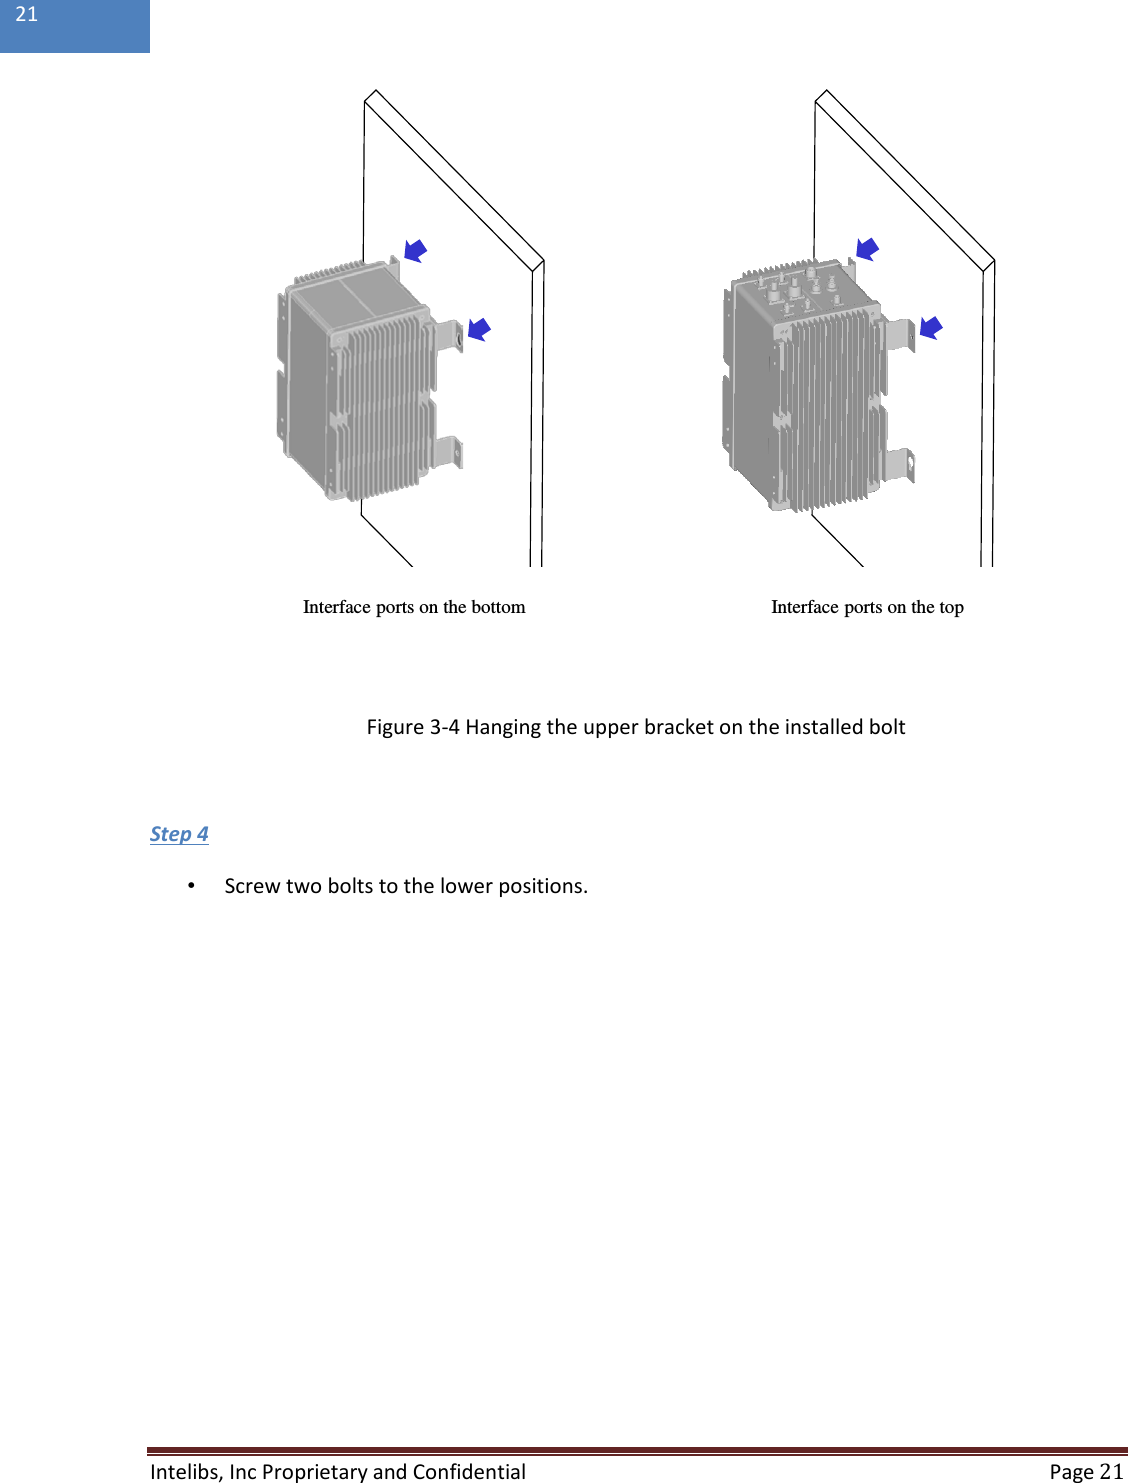  Intelibs, Inc Proprietary and Confidential  Page 21  21   Figure 3-4 Hanging the upper bracket on the installed bolt   •  Screw two bolts to the lower positions. Step 4   Interface ports on the bottom Interface ports on the top